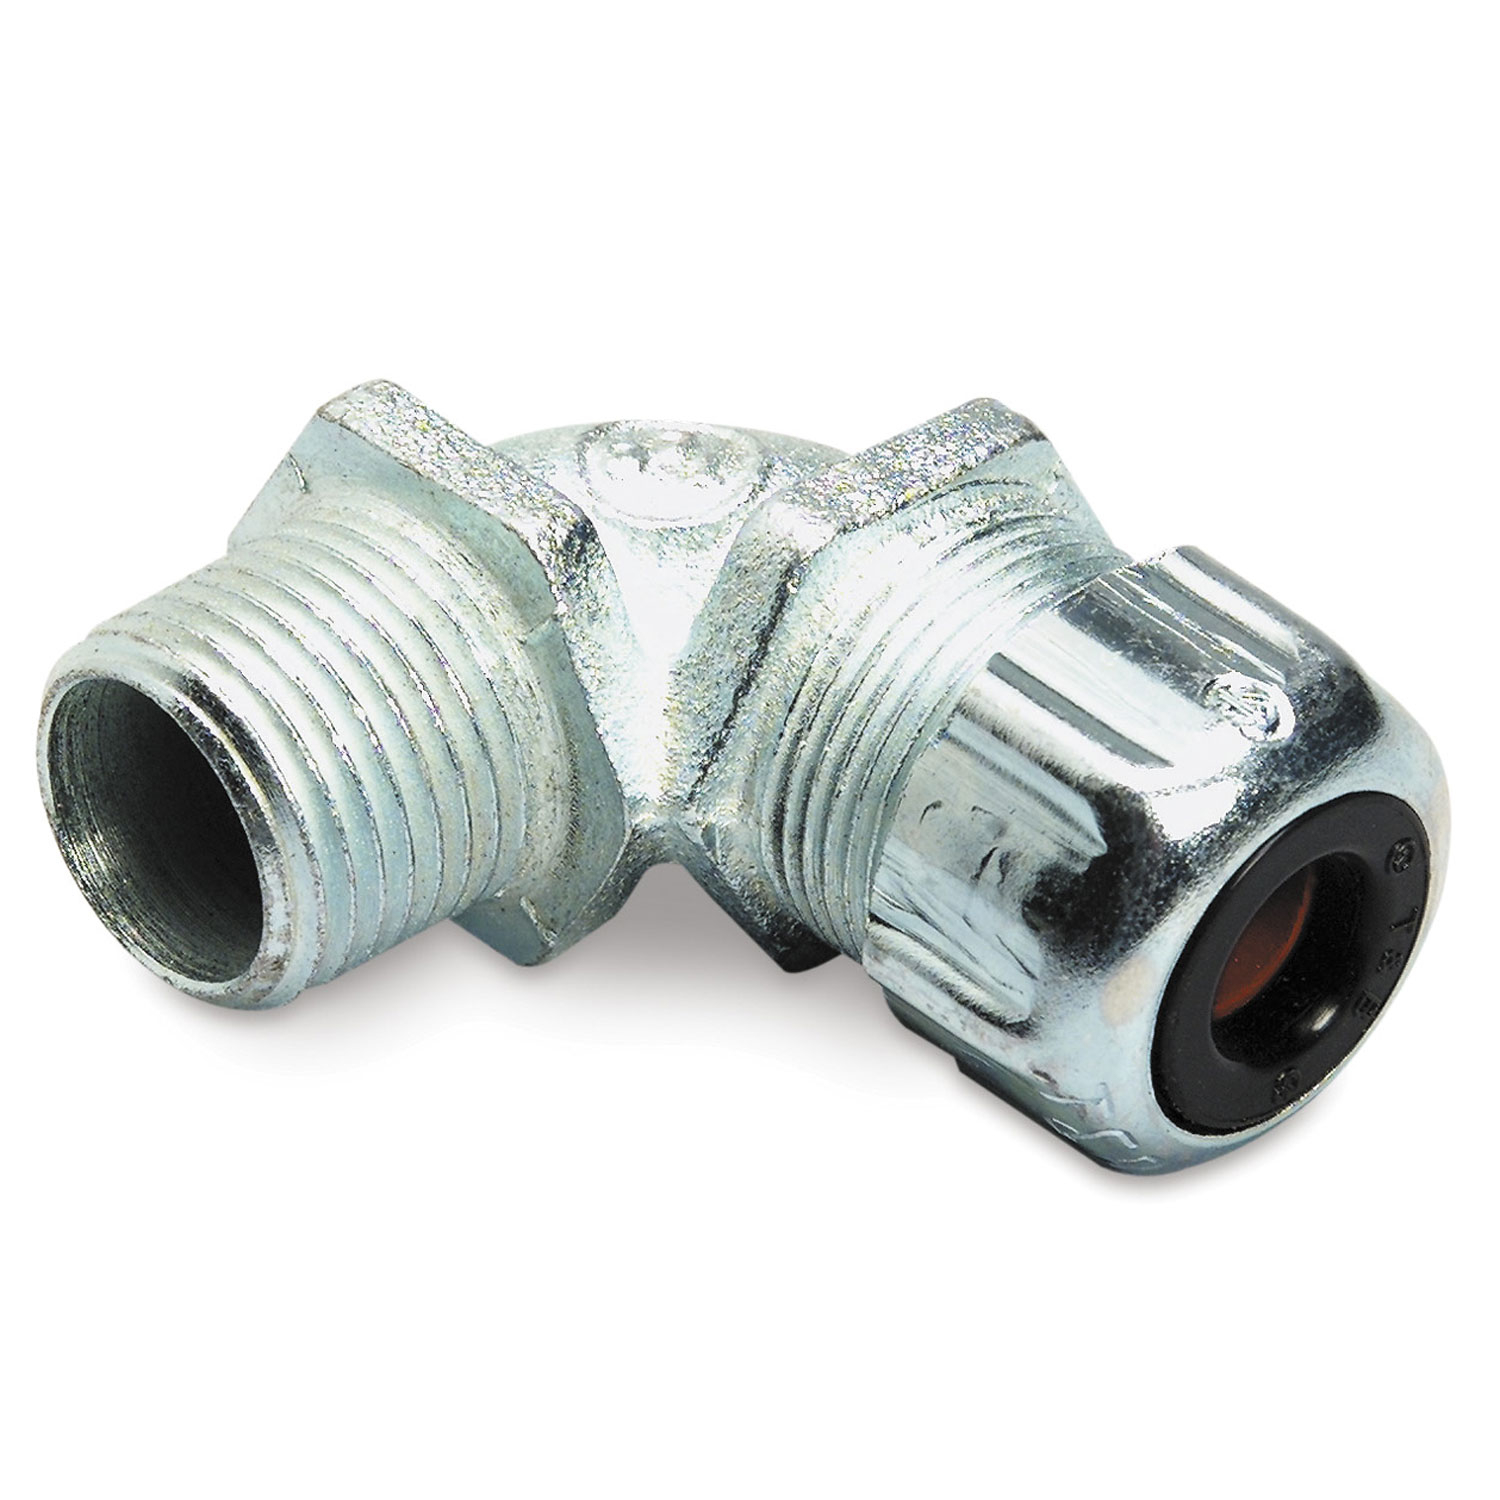 T&B® 4960NM Industrial Fitting Ranger® Angled Strain Relief Cord Connector,  1/2 in Trade, 1/8 to 3/8 in Cable Openings